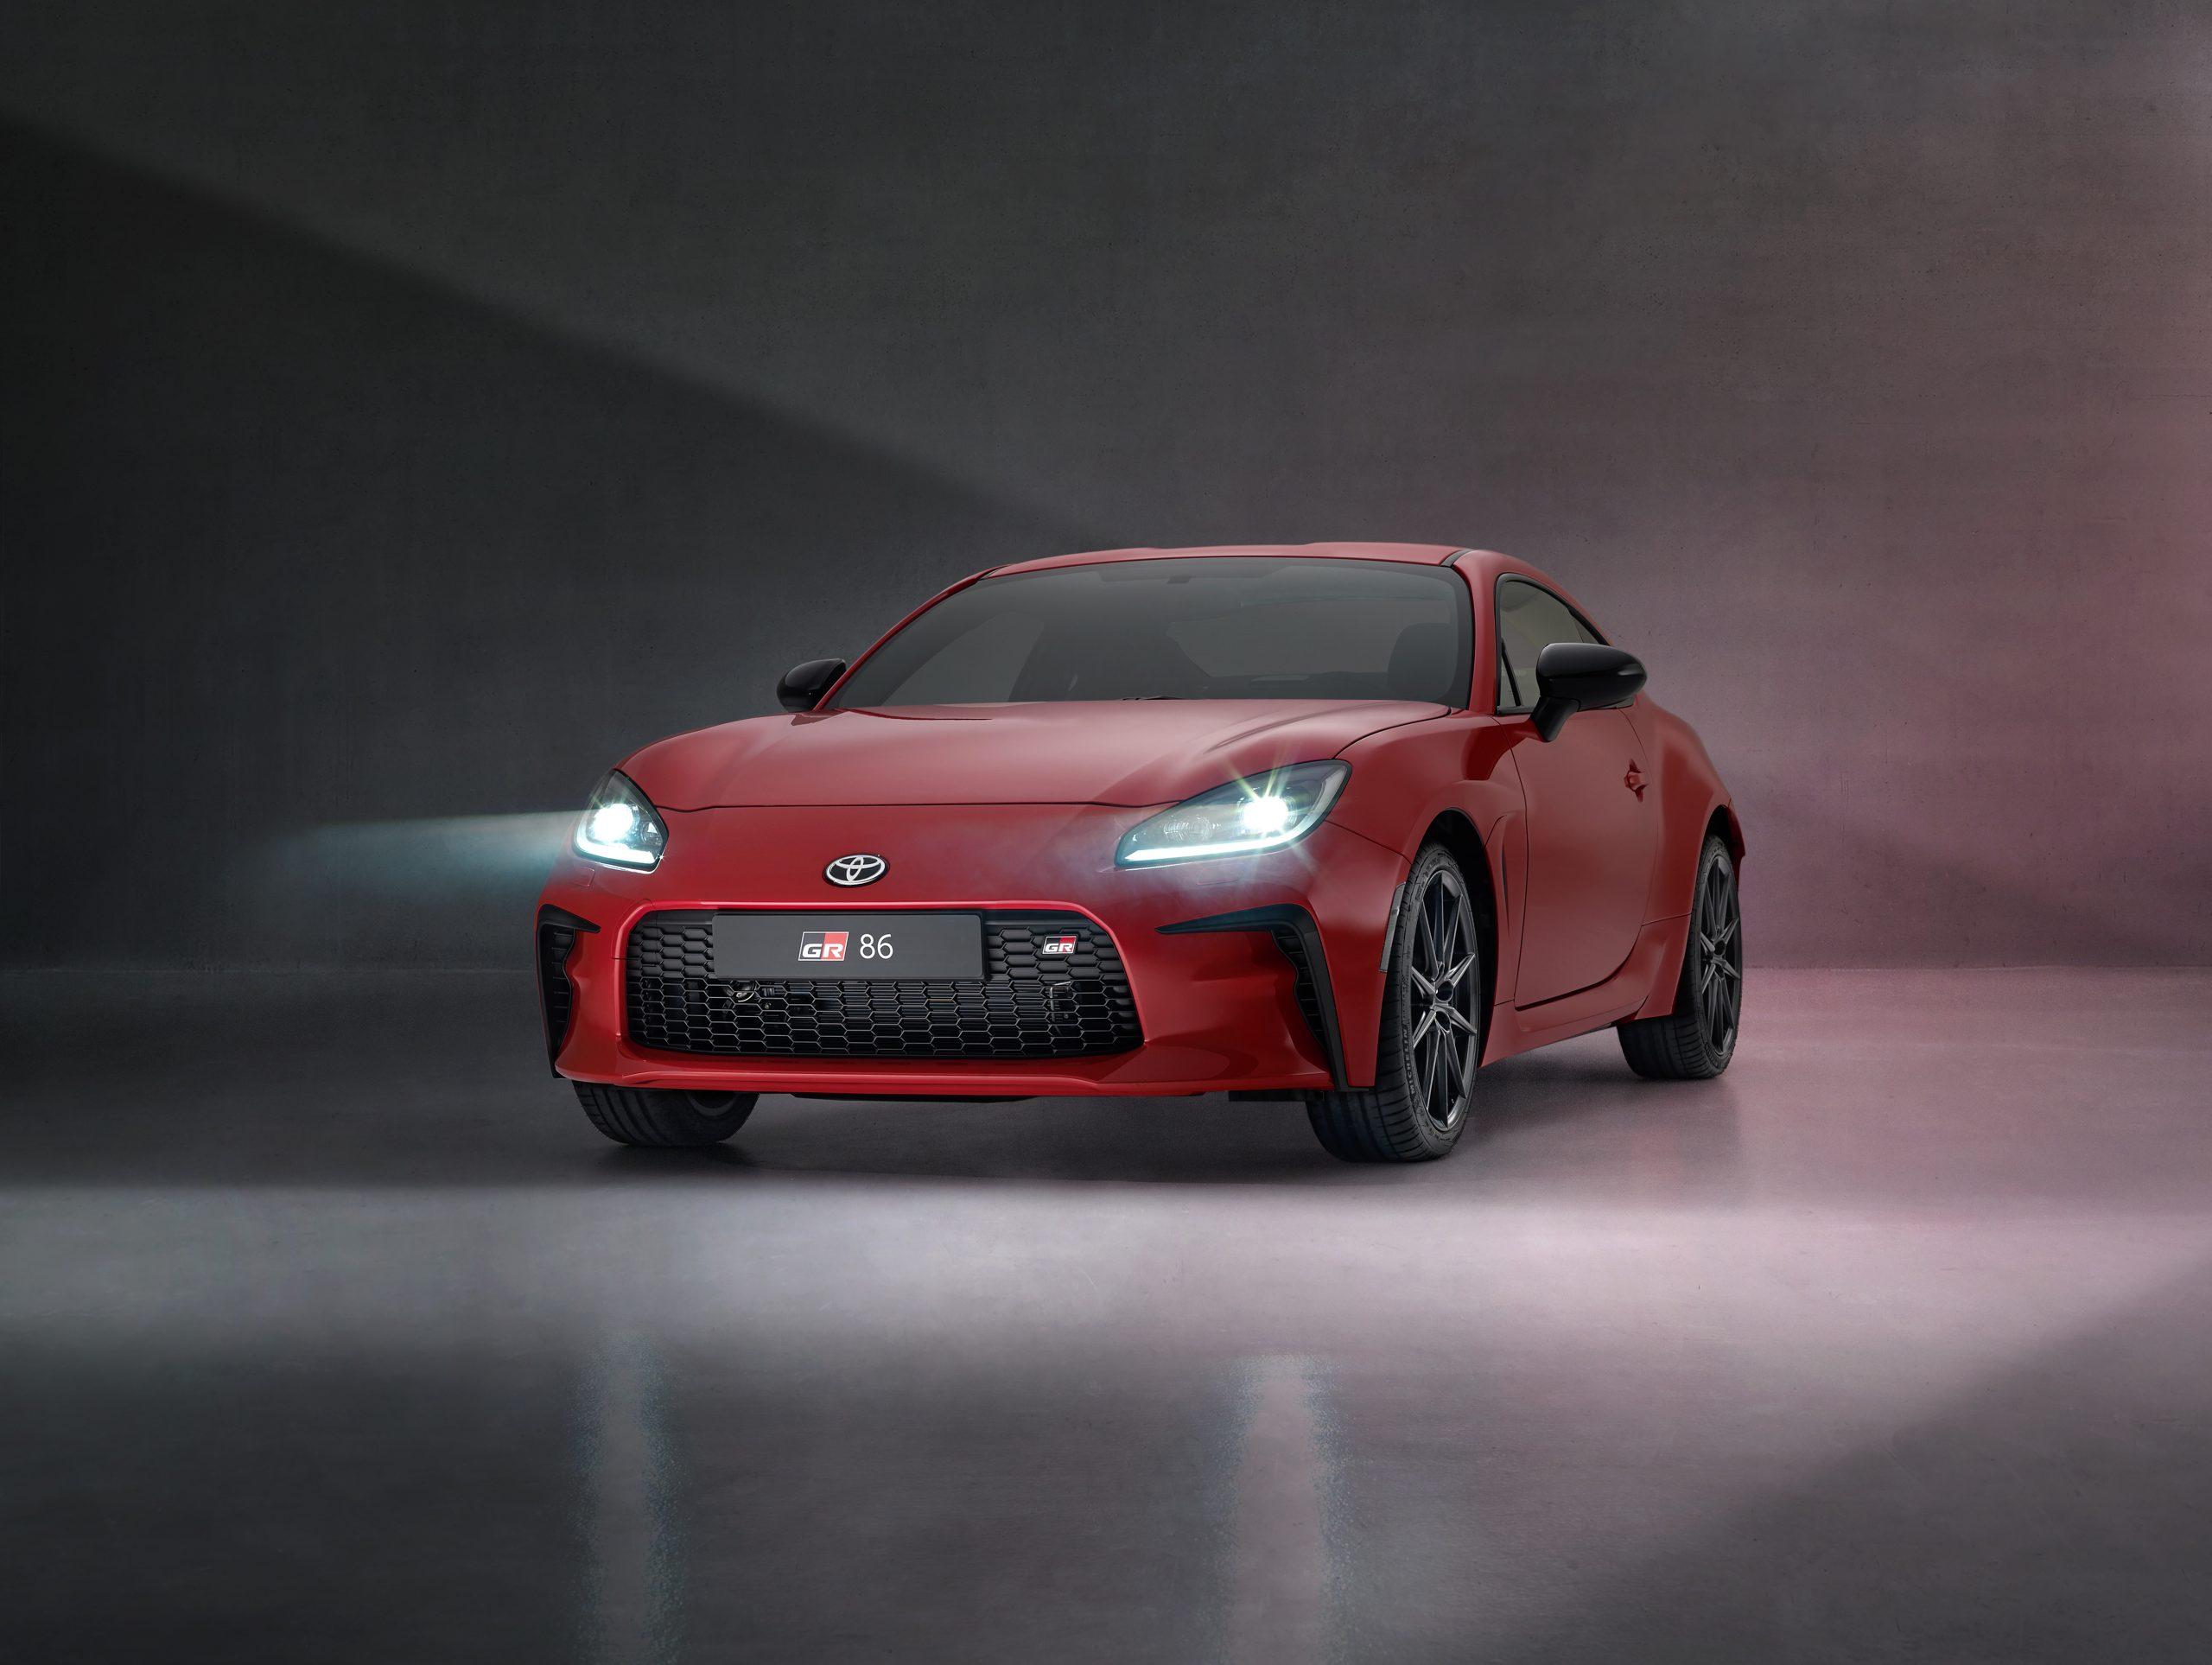 Toyota launches sales of the new GR86 coupe